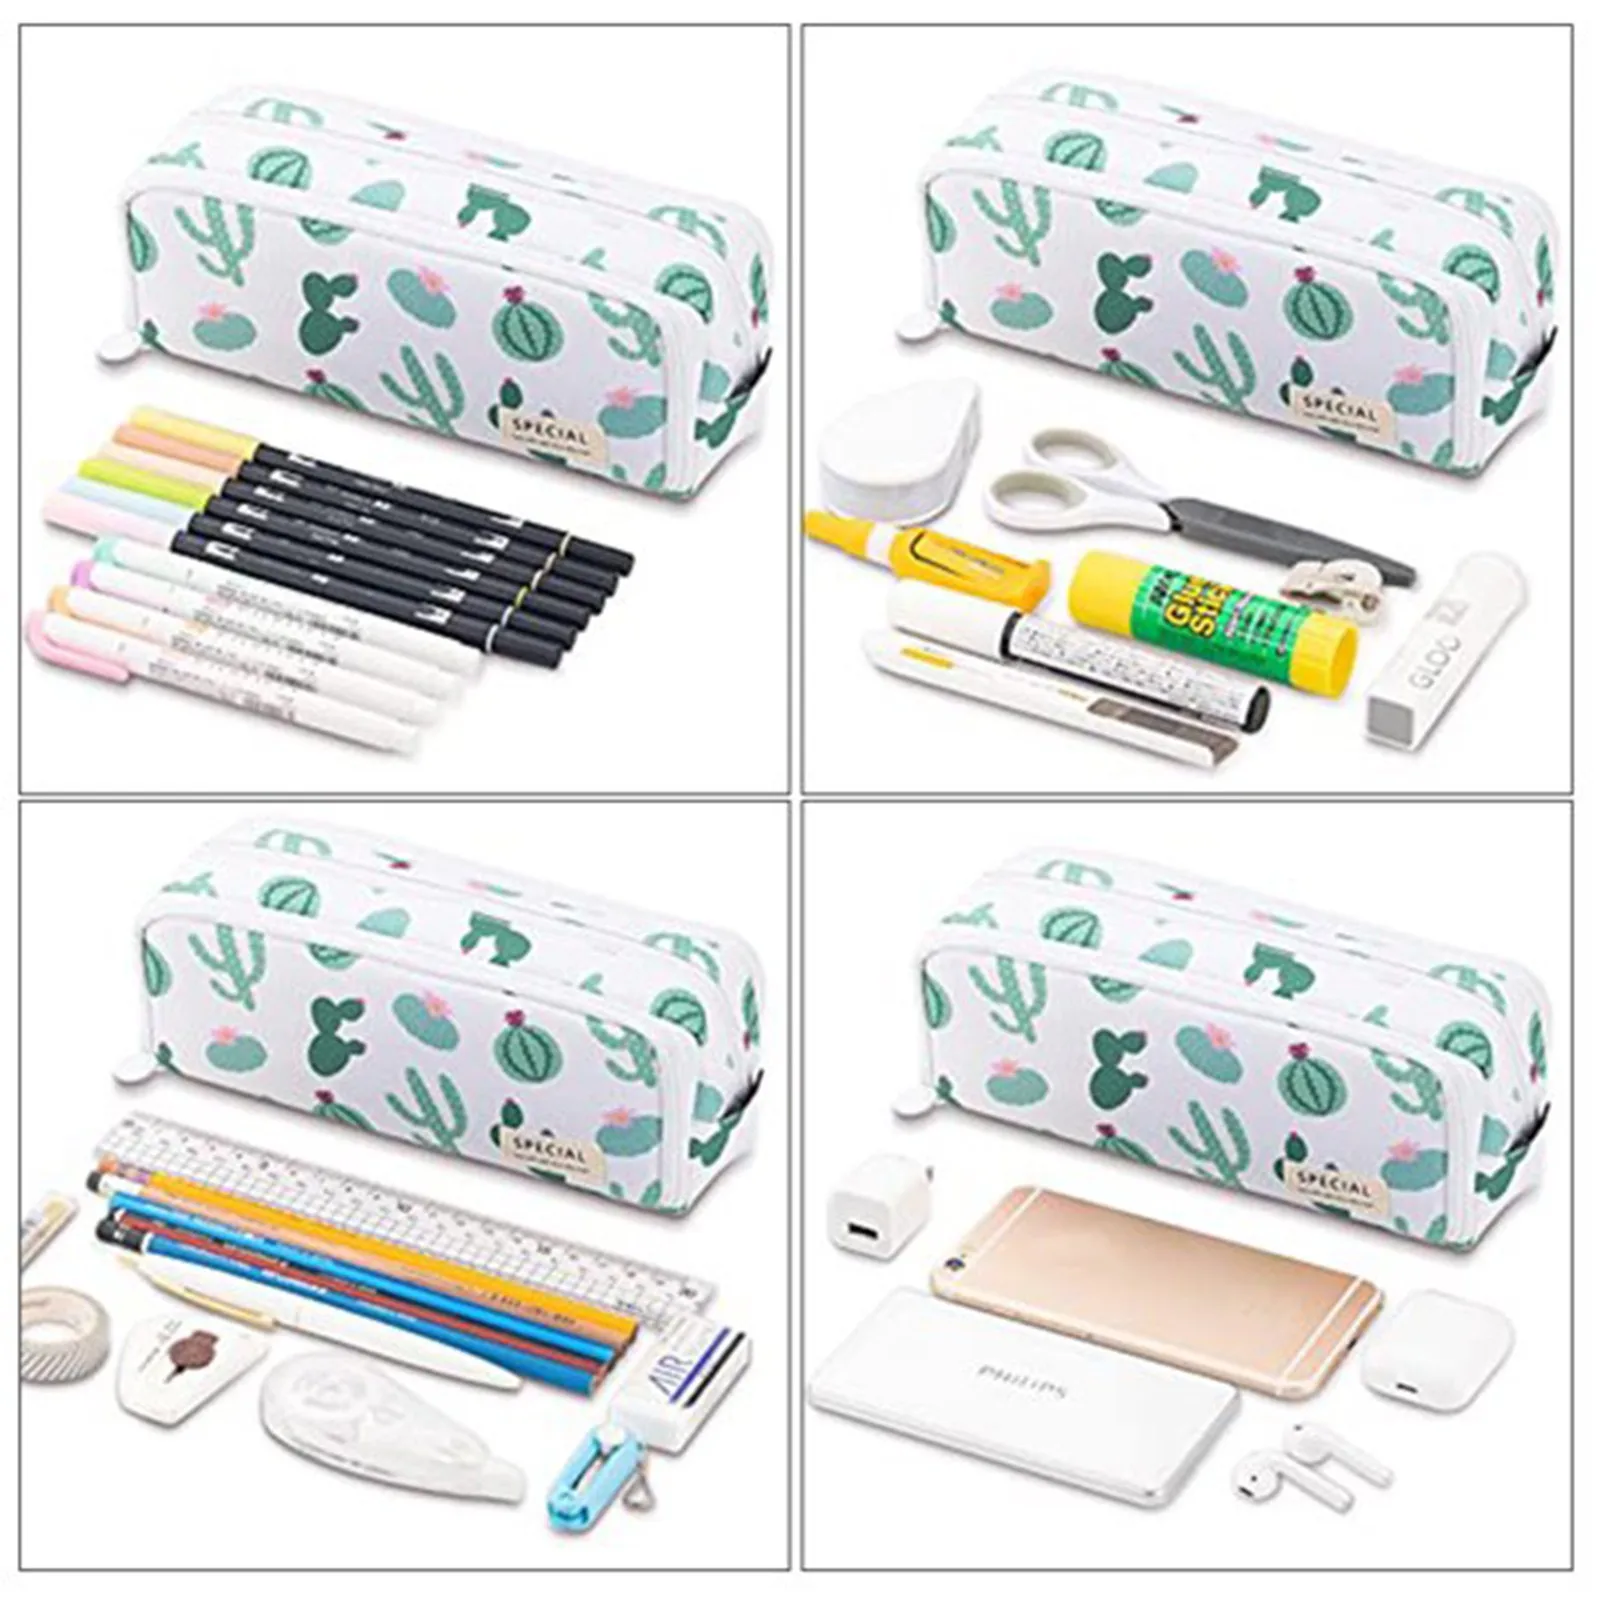 Pencil Case Tray Pencil Pouch with 3 Compartments Stationery Bag Pencil Bag  for Girls Teens Students Art School and Office Suppl - AliExpress